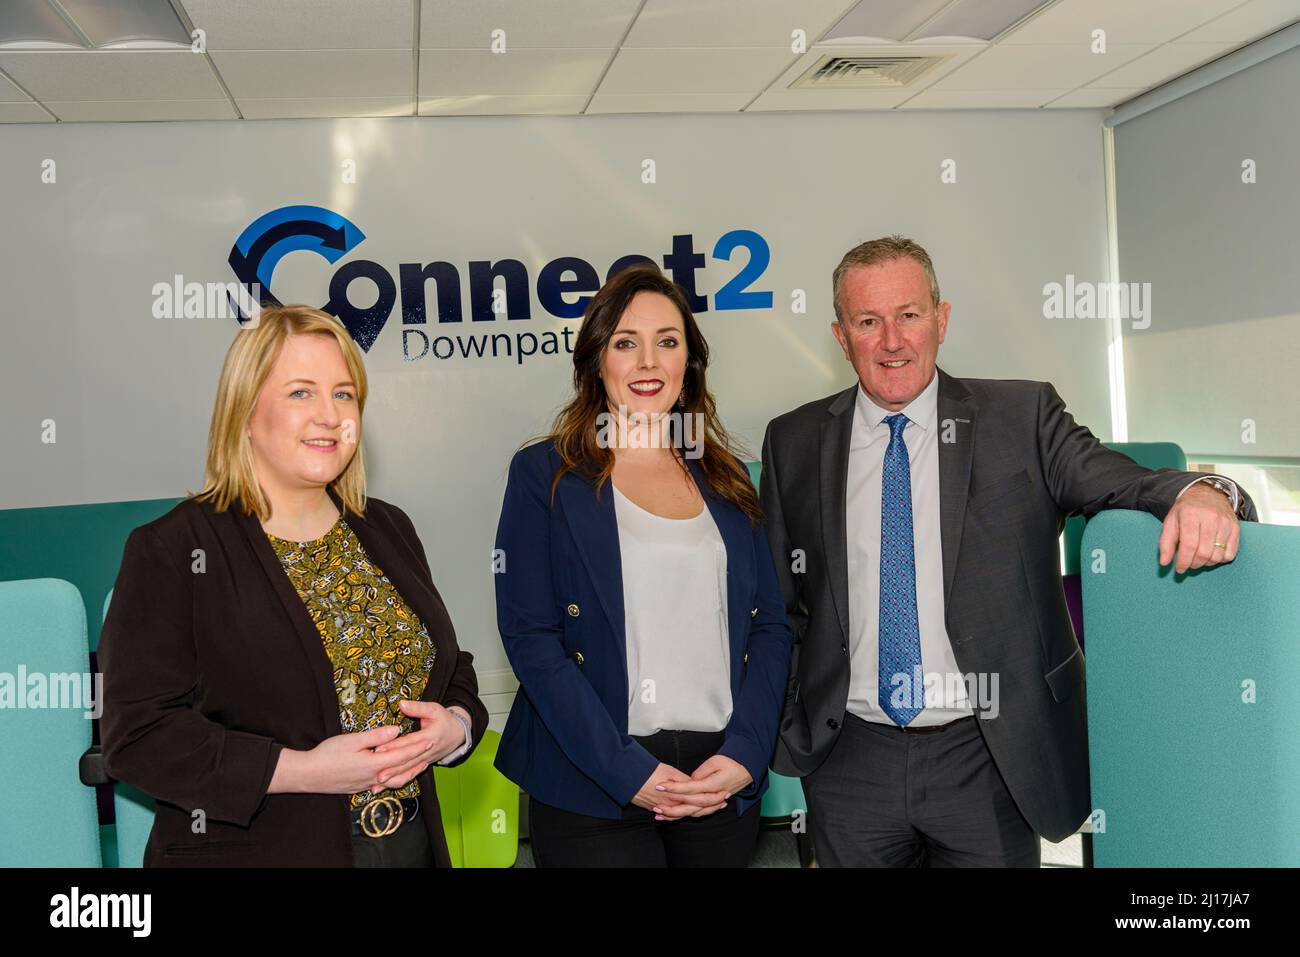 Rathkeltair House, Downpatrick, 23 March 2022 - Minister for Finance, Conor Murphy (R) with local Sinn Fein activists Una Hanlon (L) and Cathy Mason (C) at the launch of the Connect 2 Hub Stock Photo